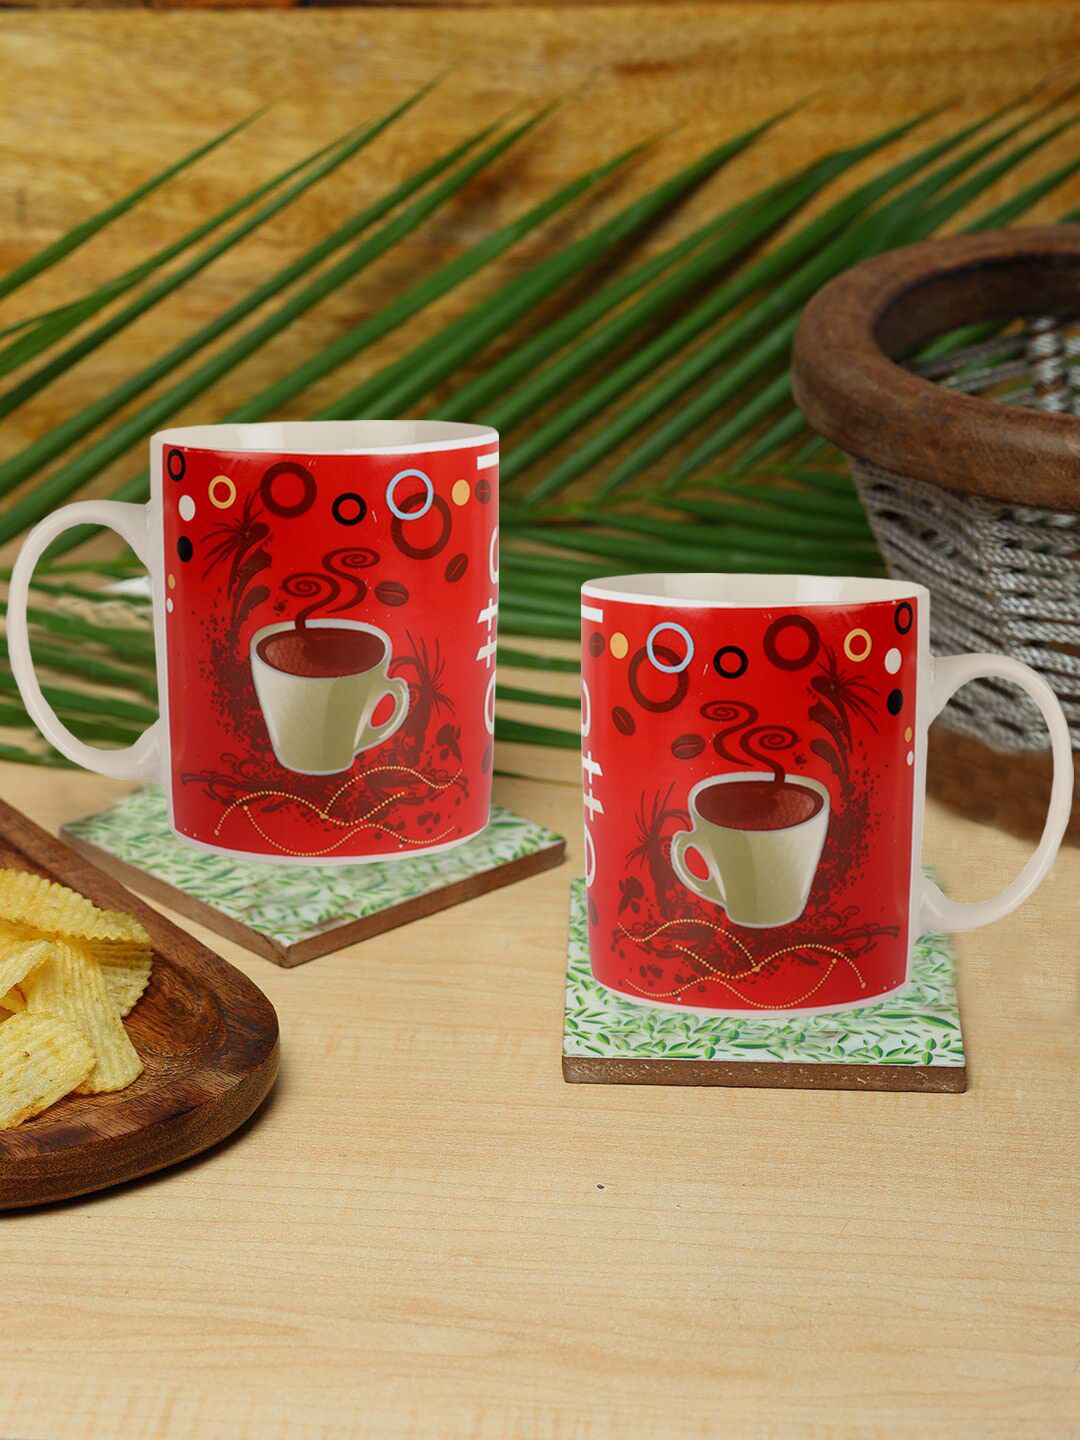 ZEVORA White & Red Printed Ceramic Glossy Mugs Set of Cups and Mugs Price in India